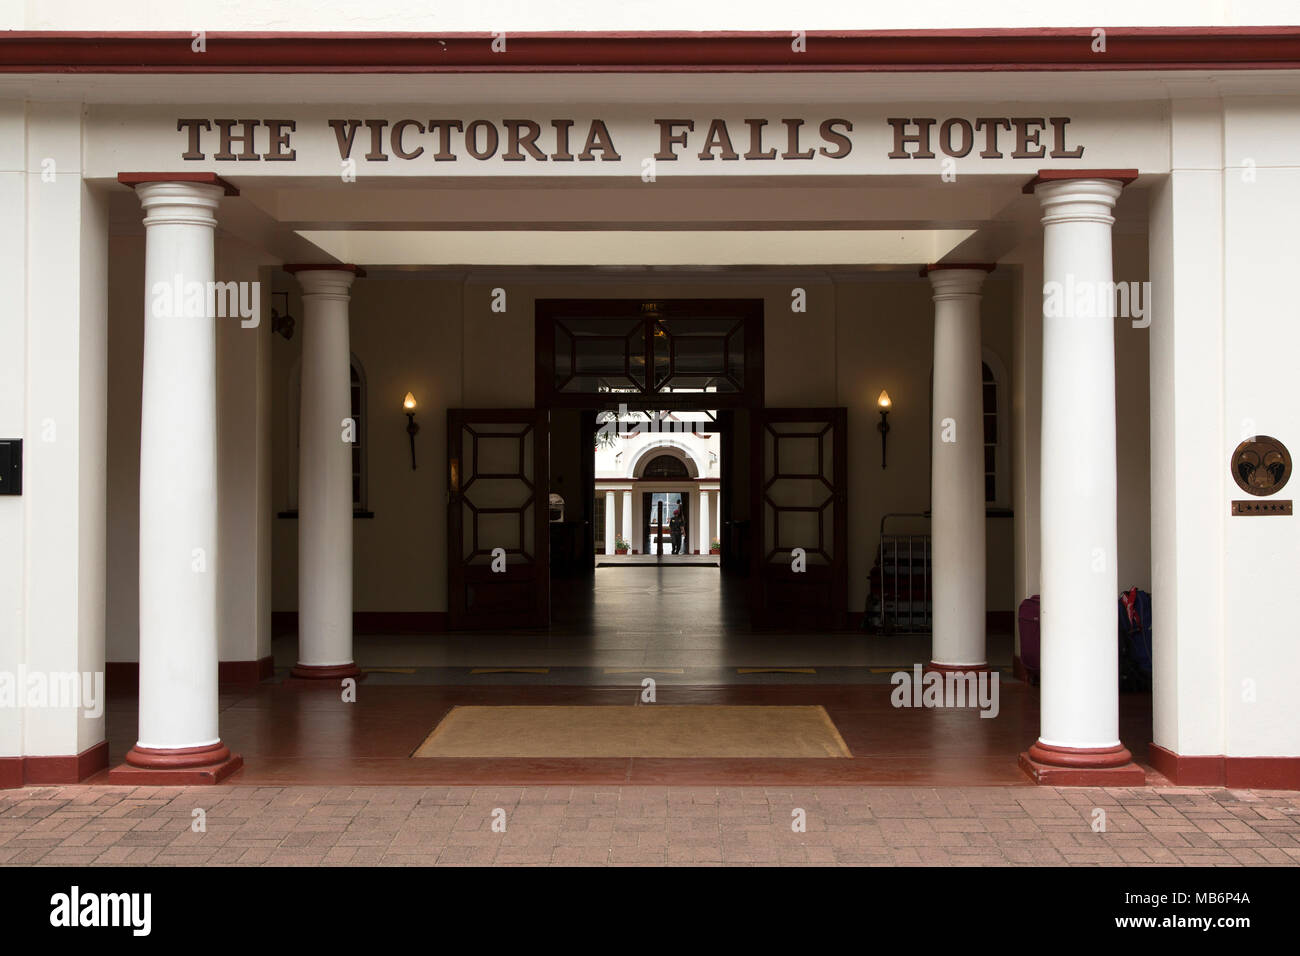 Entrance of the Victoria Falls Hotel at Victoria Falls, Zimbabwe. The luxury hotel opened in 1905. Stock Photo